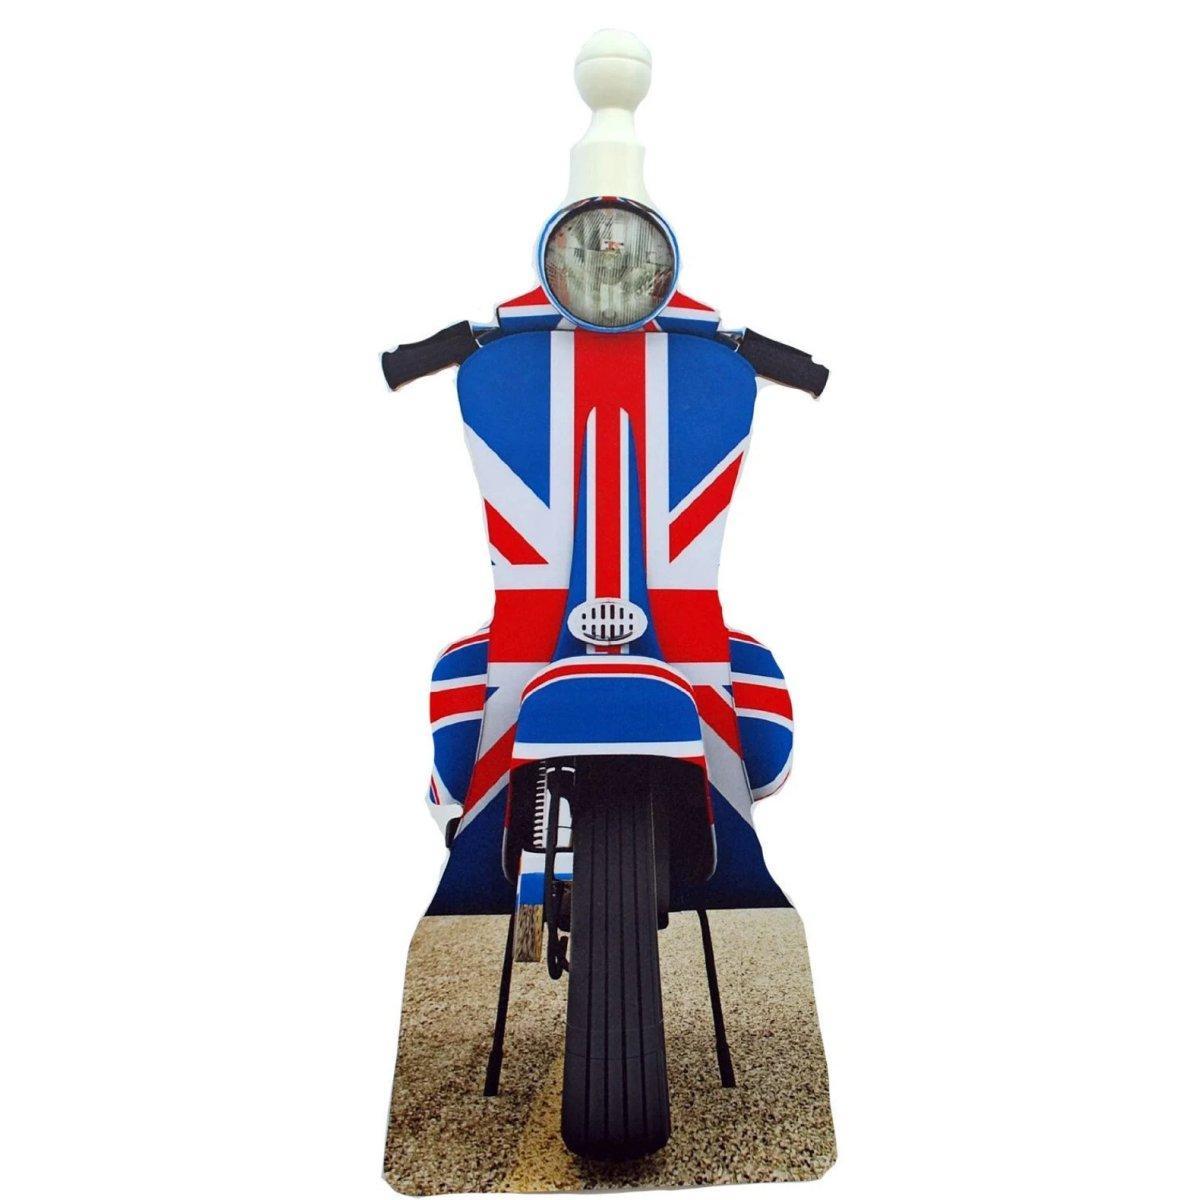 Union Jack scooter spare roll holder